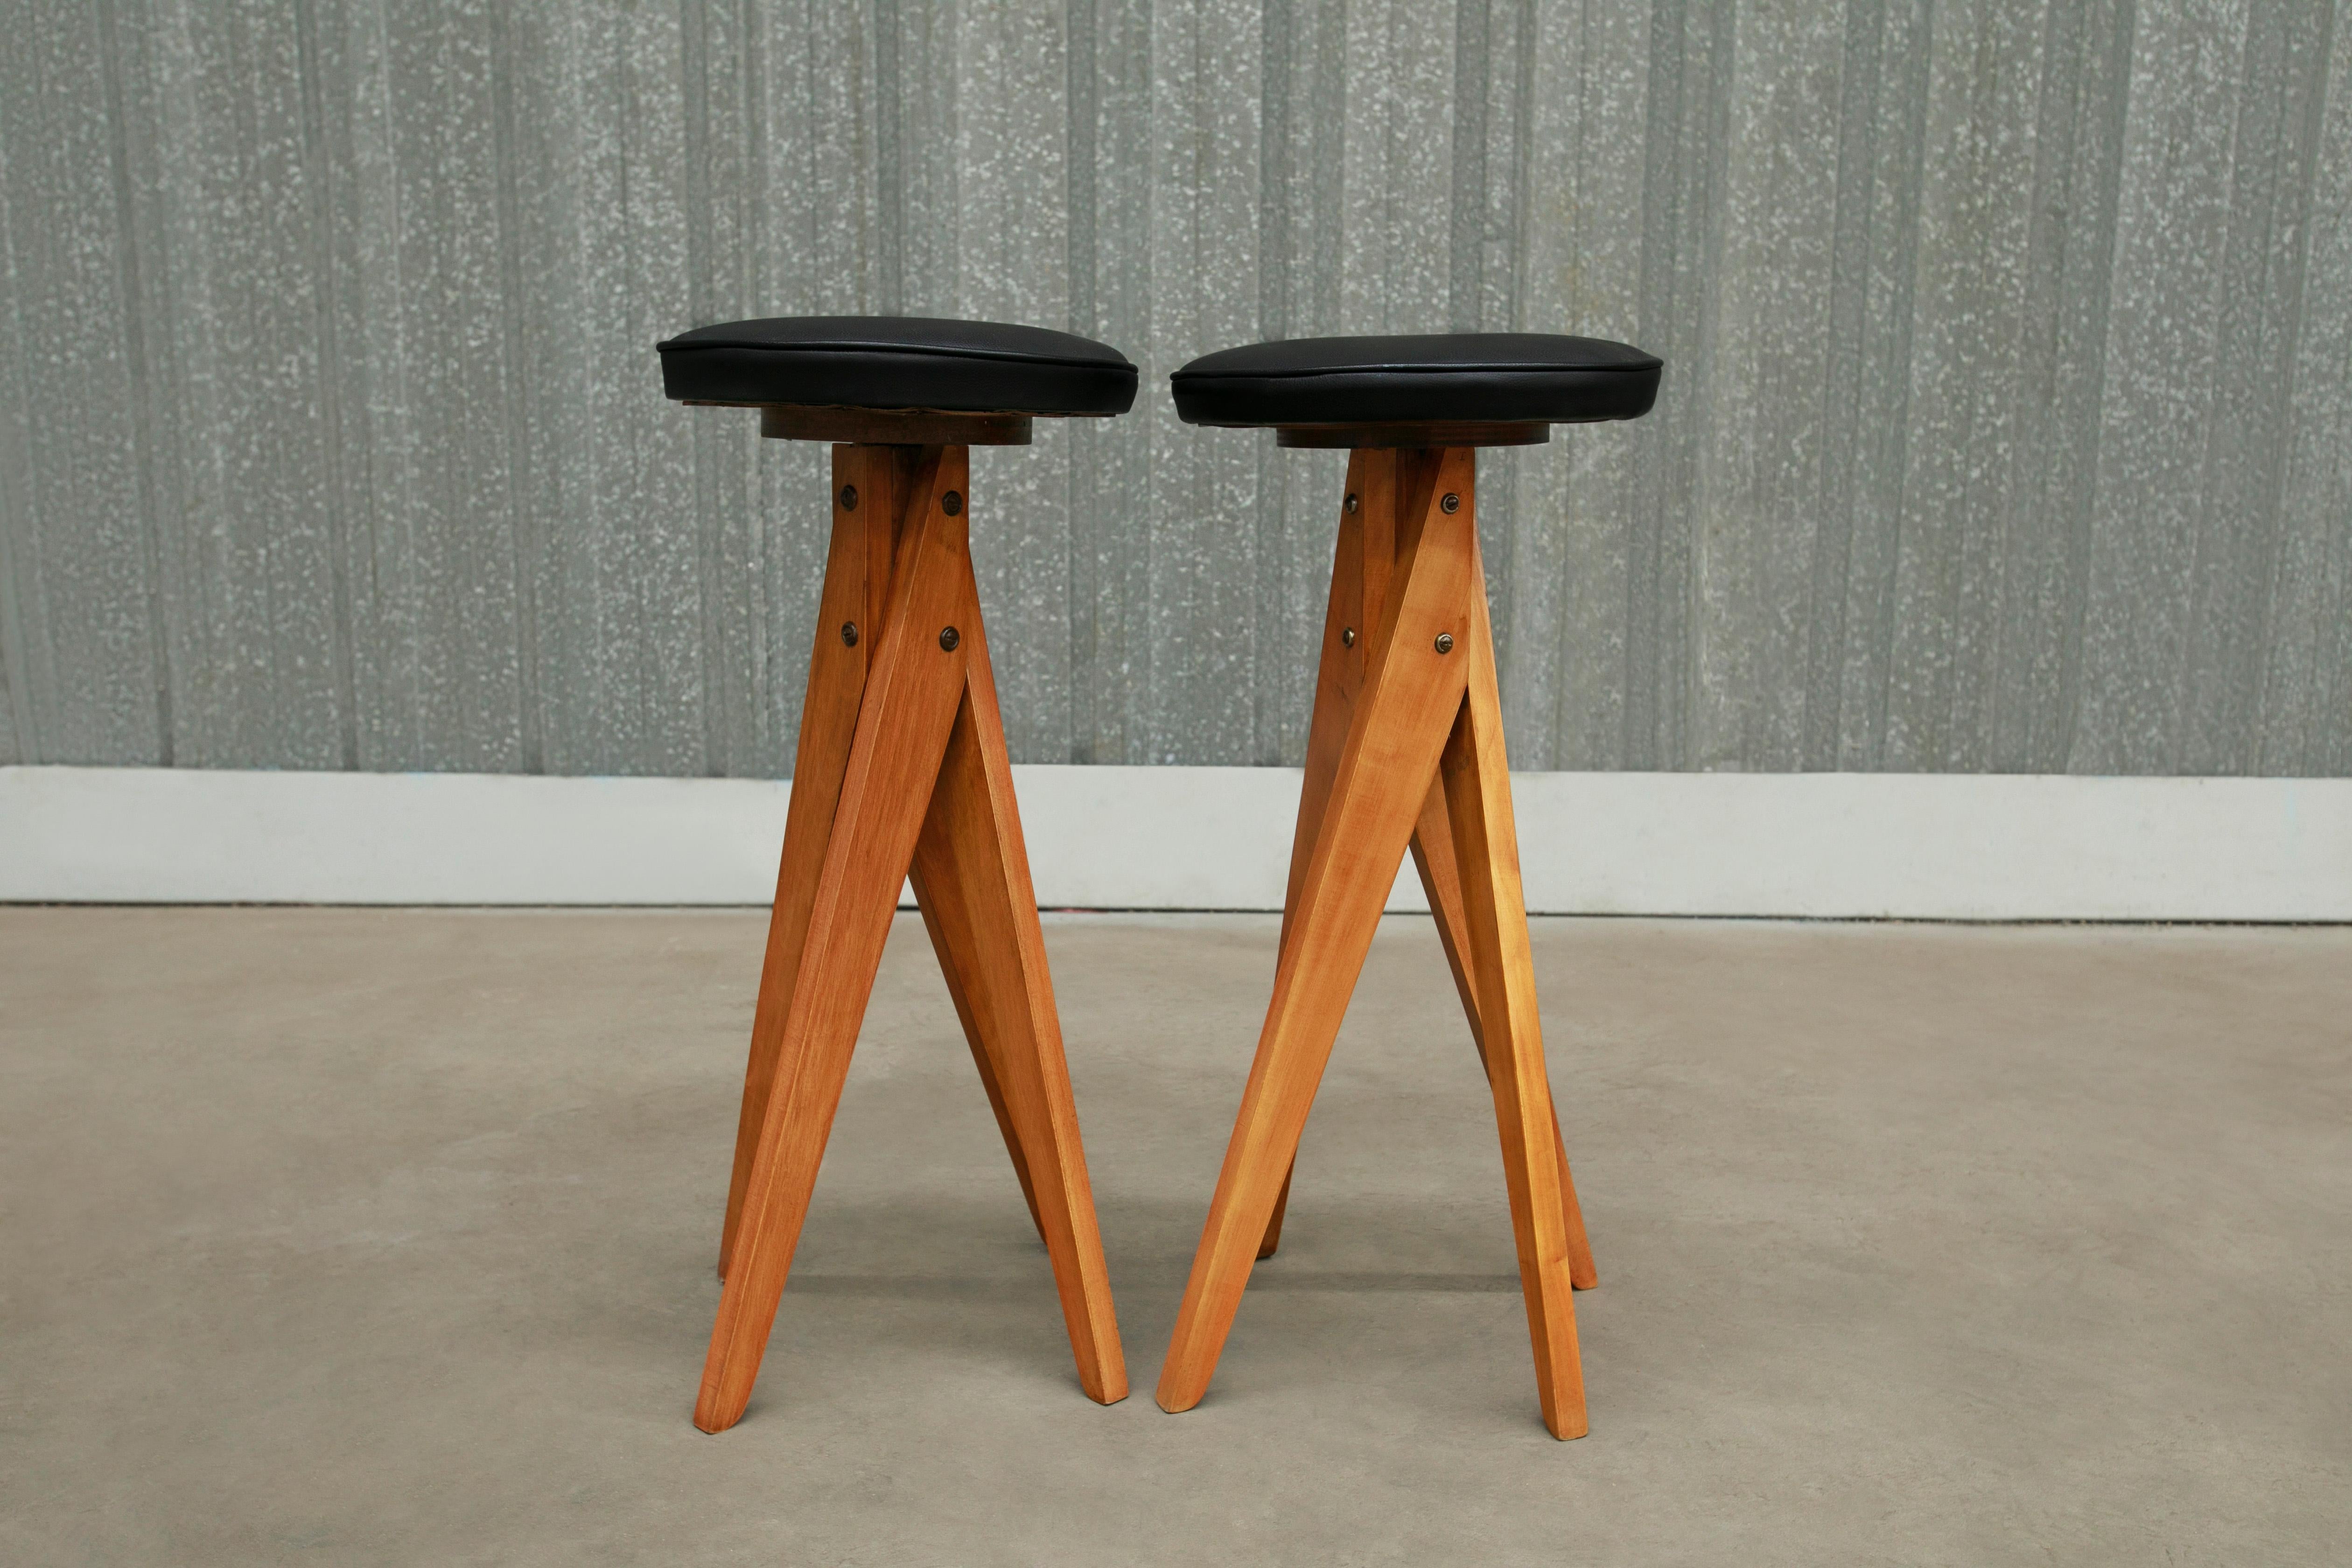 Available today, this Mid-Century Modern Stools in Hardwood designed by Jose Zanine Caldas for Moveis Artisticos Z, in the fifties are truly one of a kind!

The stools are made in Pau Marfim wood with a faux leather seat and sculpted legs.